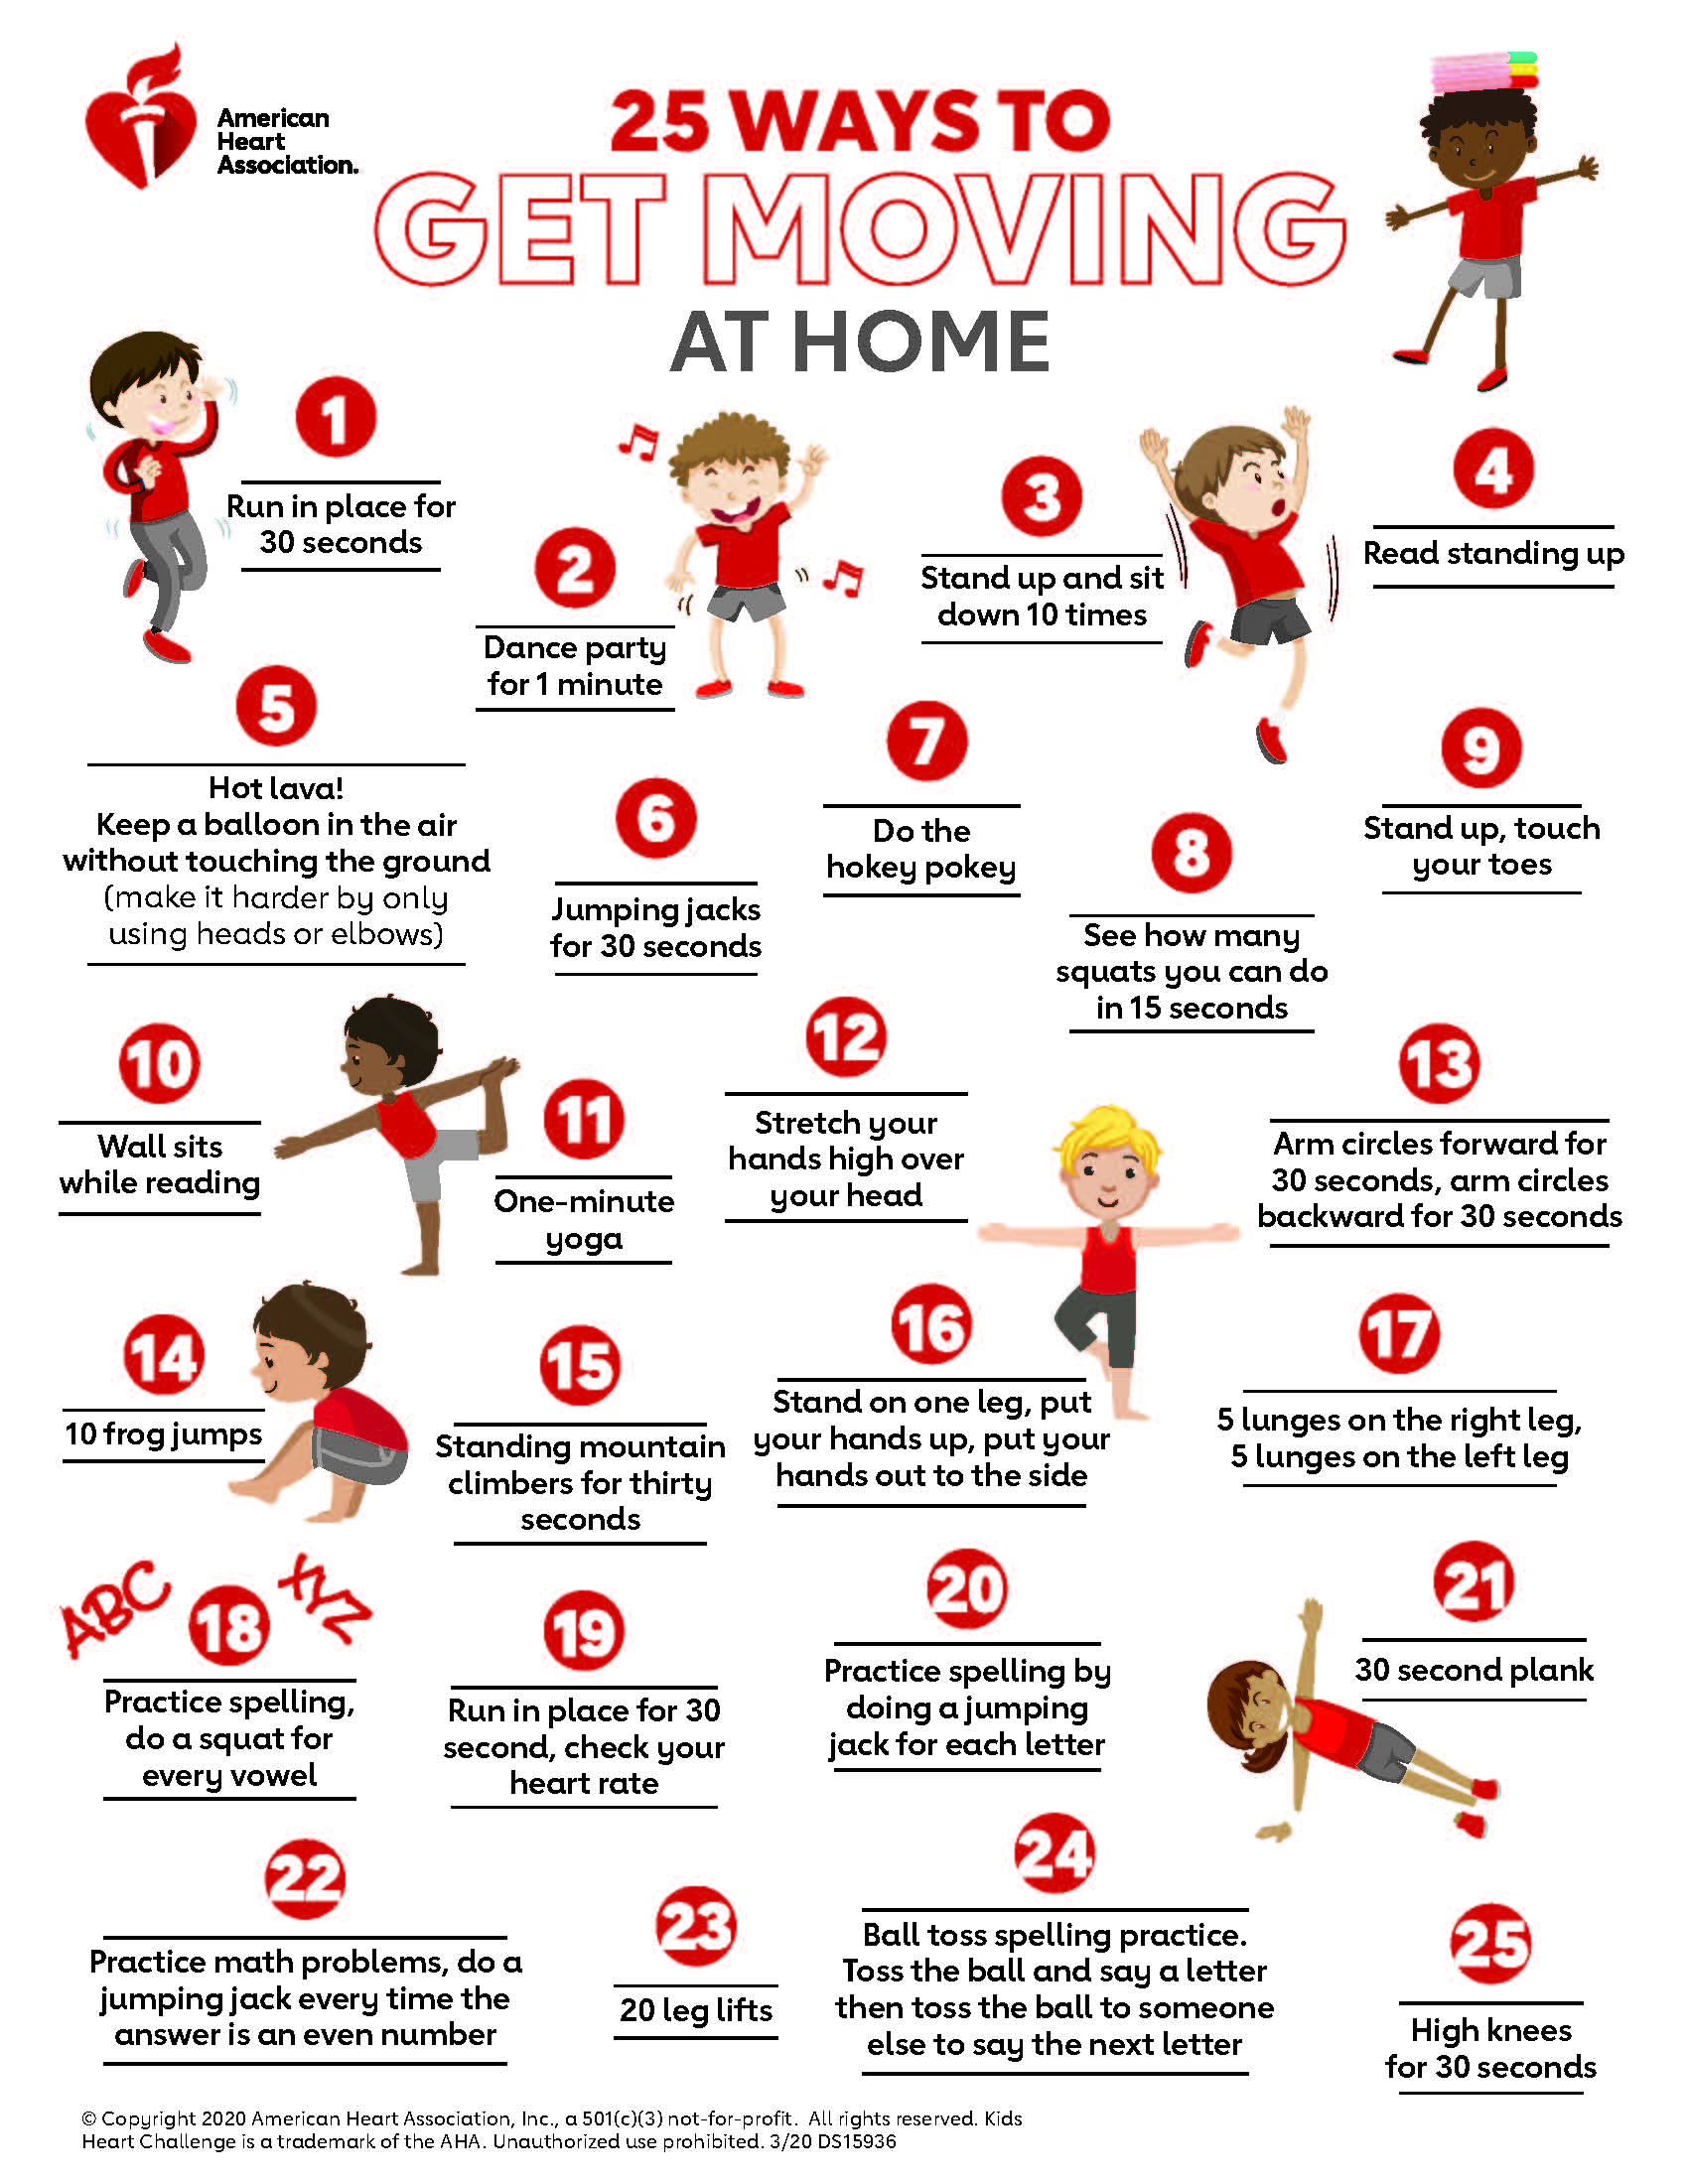 5 Exercises To Do At Home - ACTIV LIVING COMMUNITY